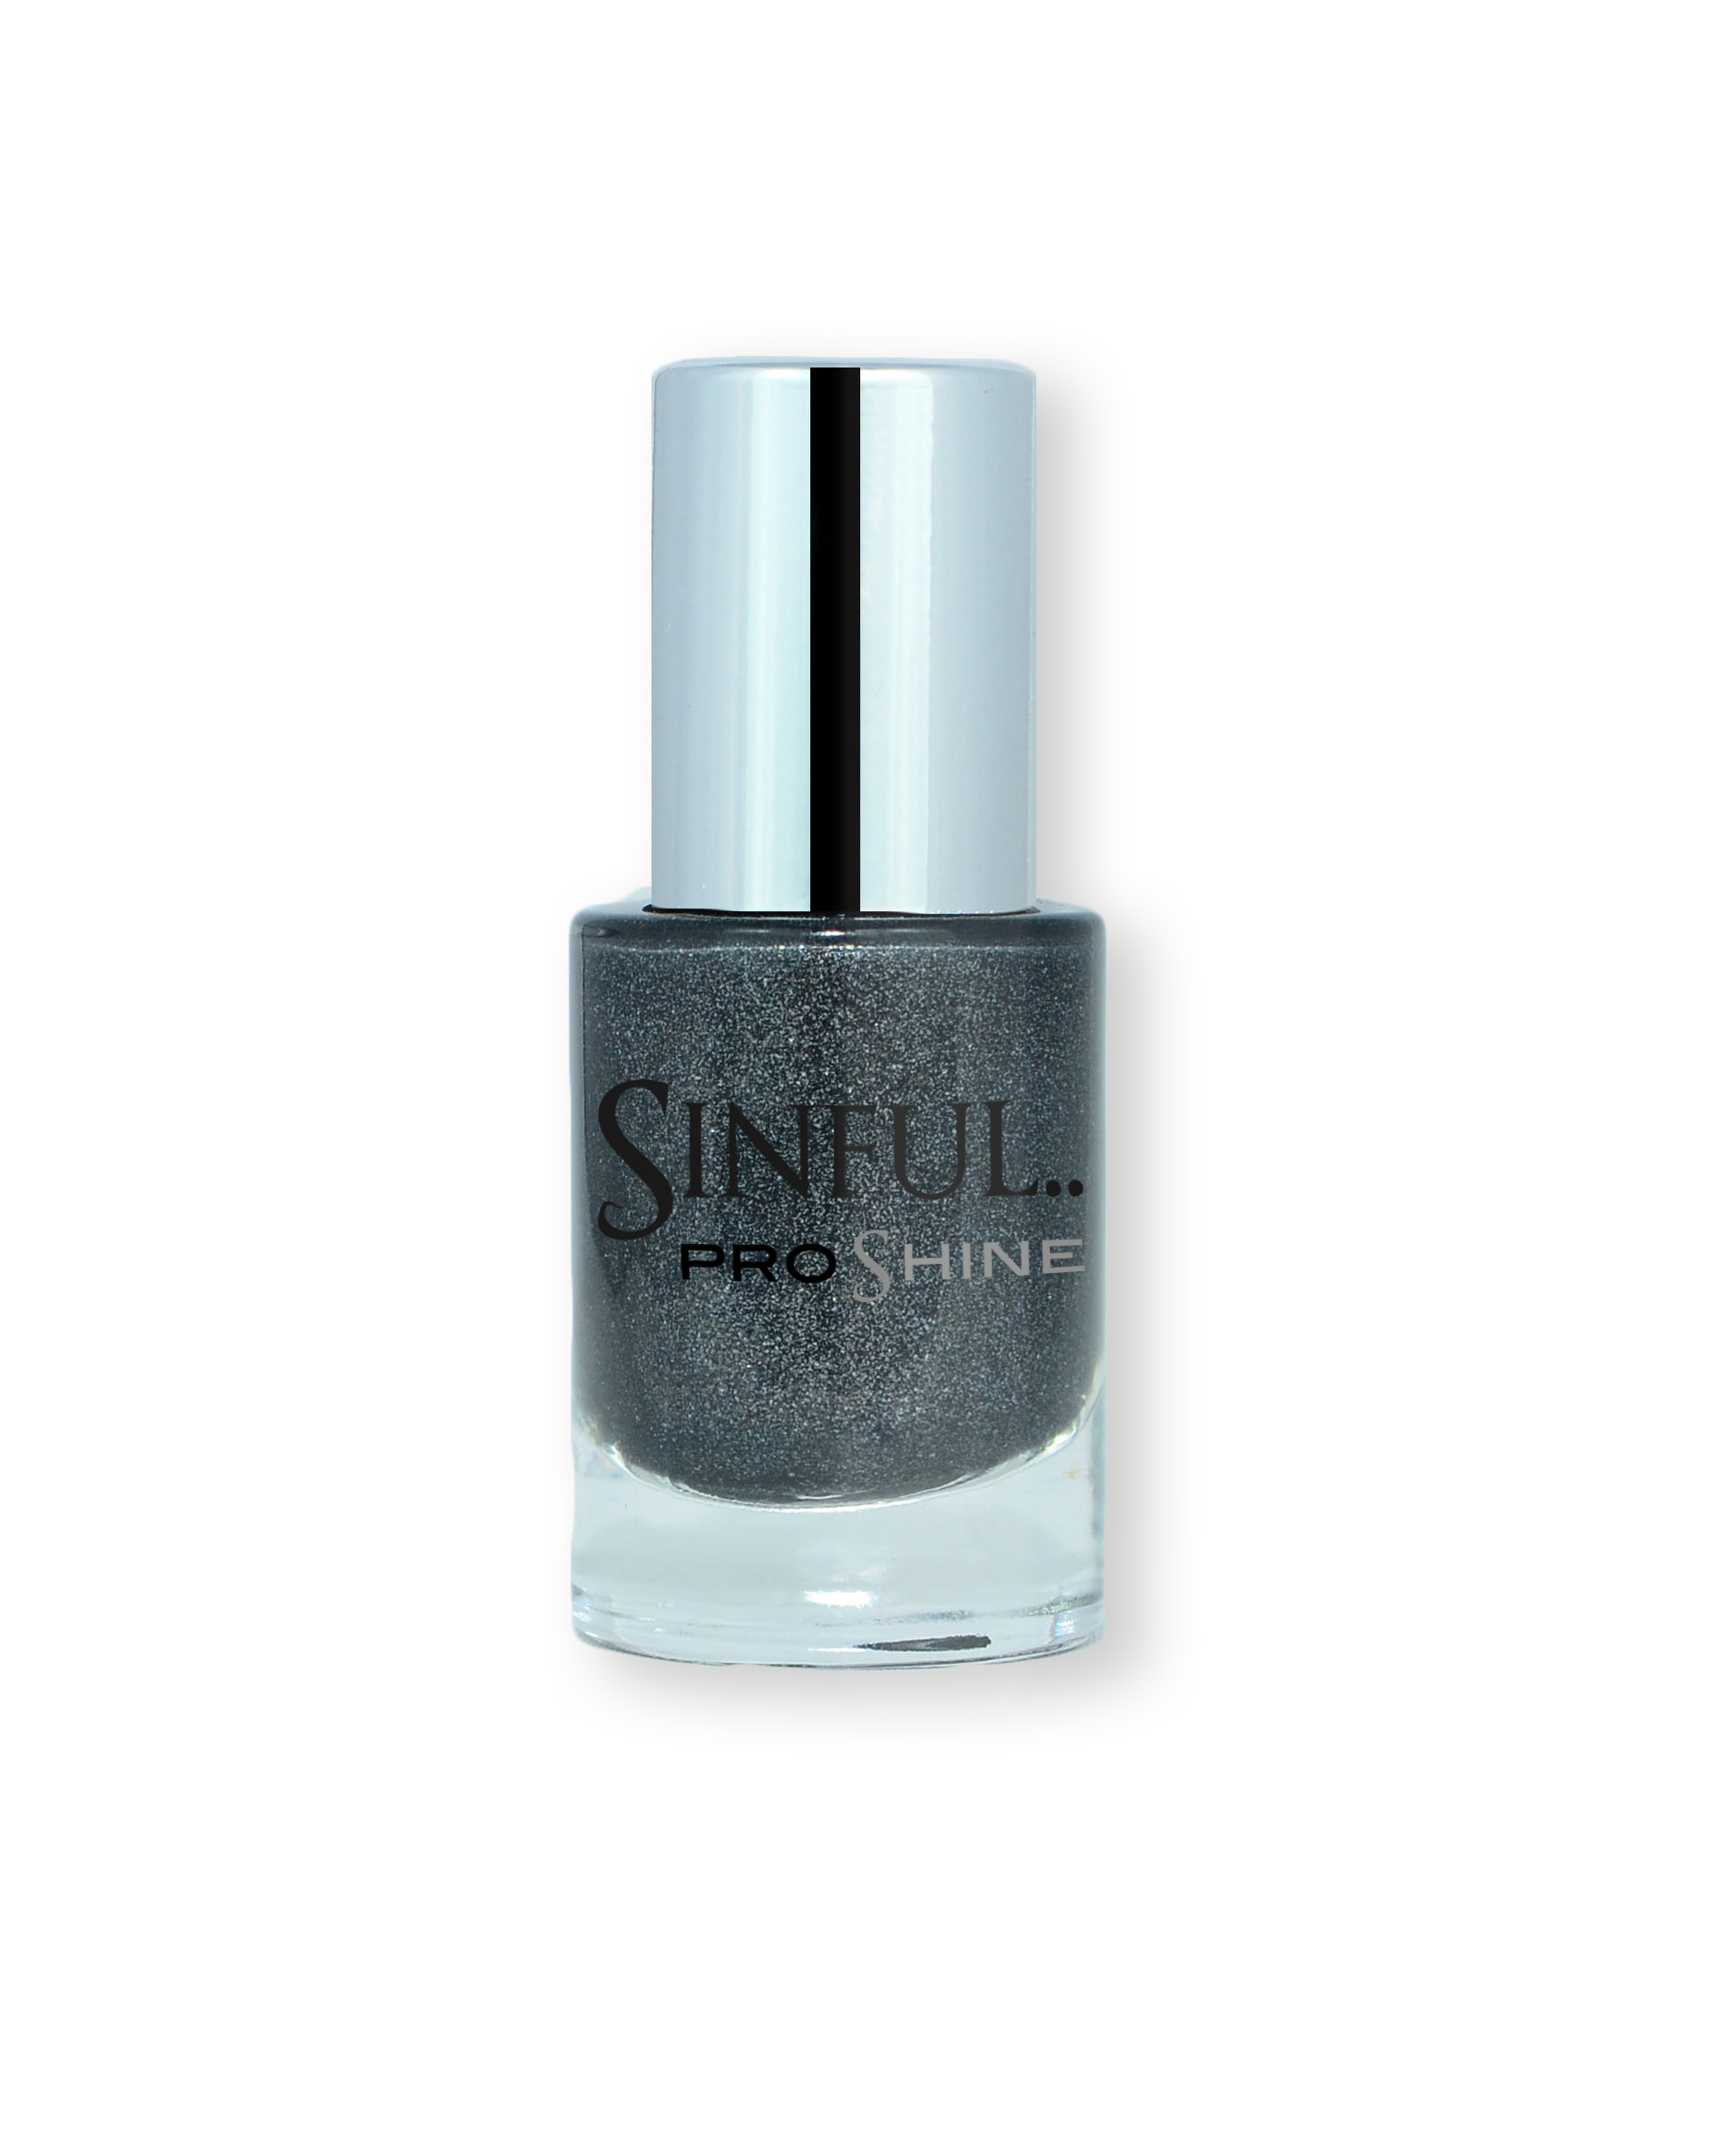 Sinful PROshine is a revolution into top spec imitation gel-like formula, easy application, full coverage and a sleek finish. Spoil yourself with the choice of 42 shades, expertly formulated with the finest grade of pigments. Black Magic: Charcoal black with fine crystal pearls